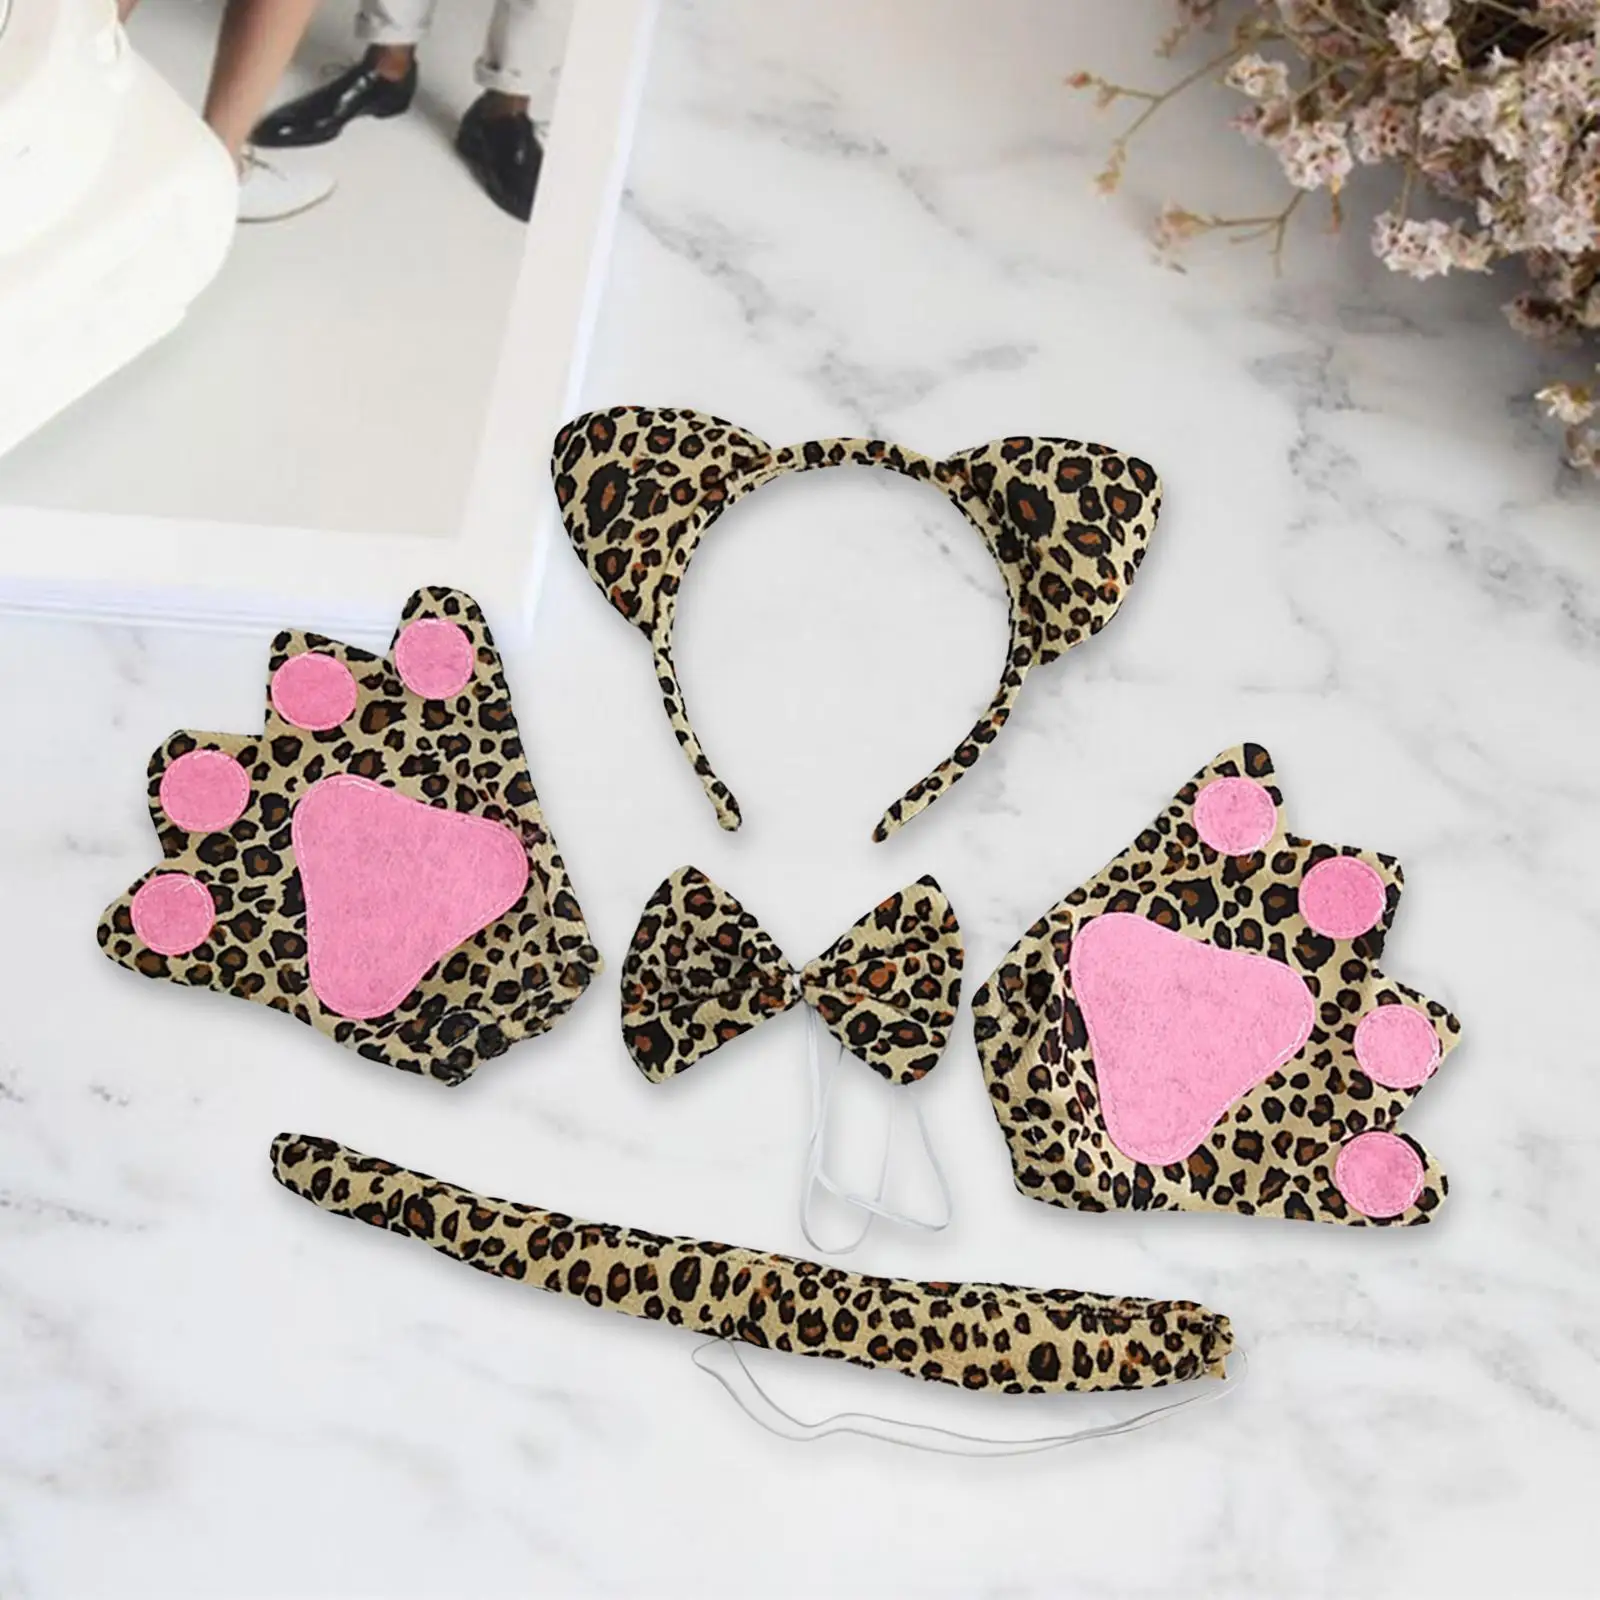 4x Leopard Costume Set Gloves Hair Accessory Ears Tail Bow Tie Animal Dress Set for Adults Performance Carnival Party Decoration